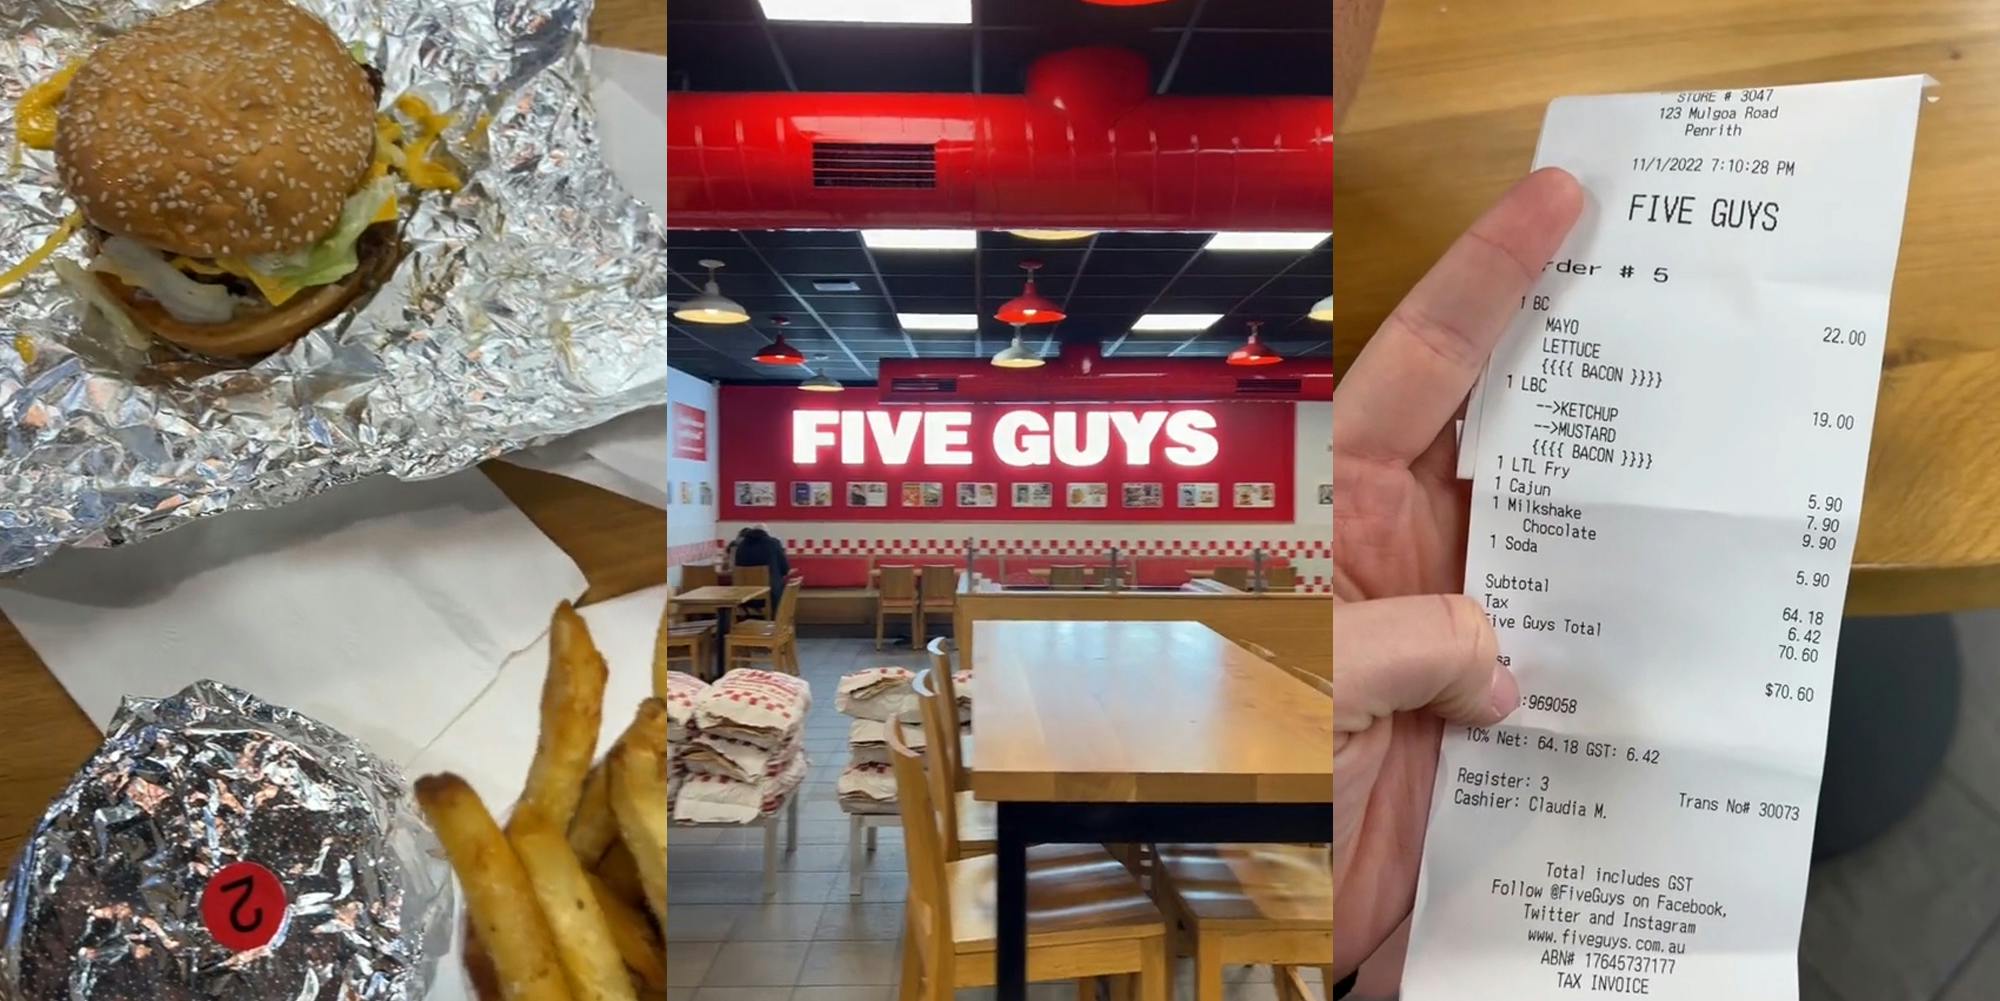 2 meals at Five Guys (l) Five Guys interior with sign (c) man holding Five Guys receipt with total "$70.60" (r)